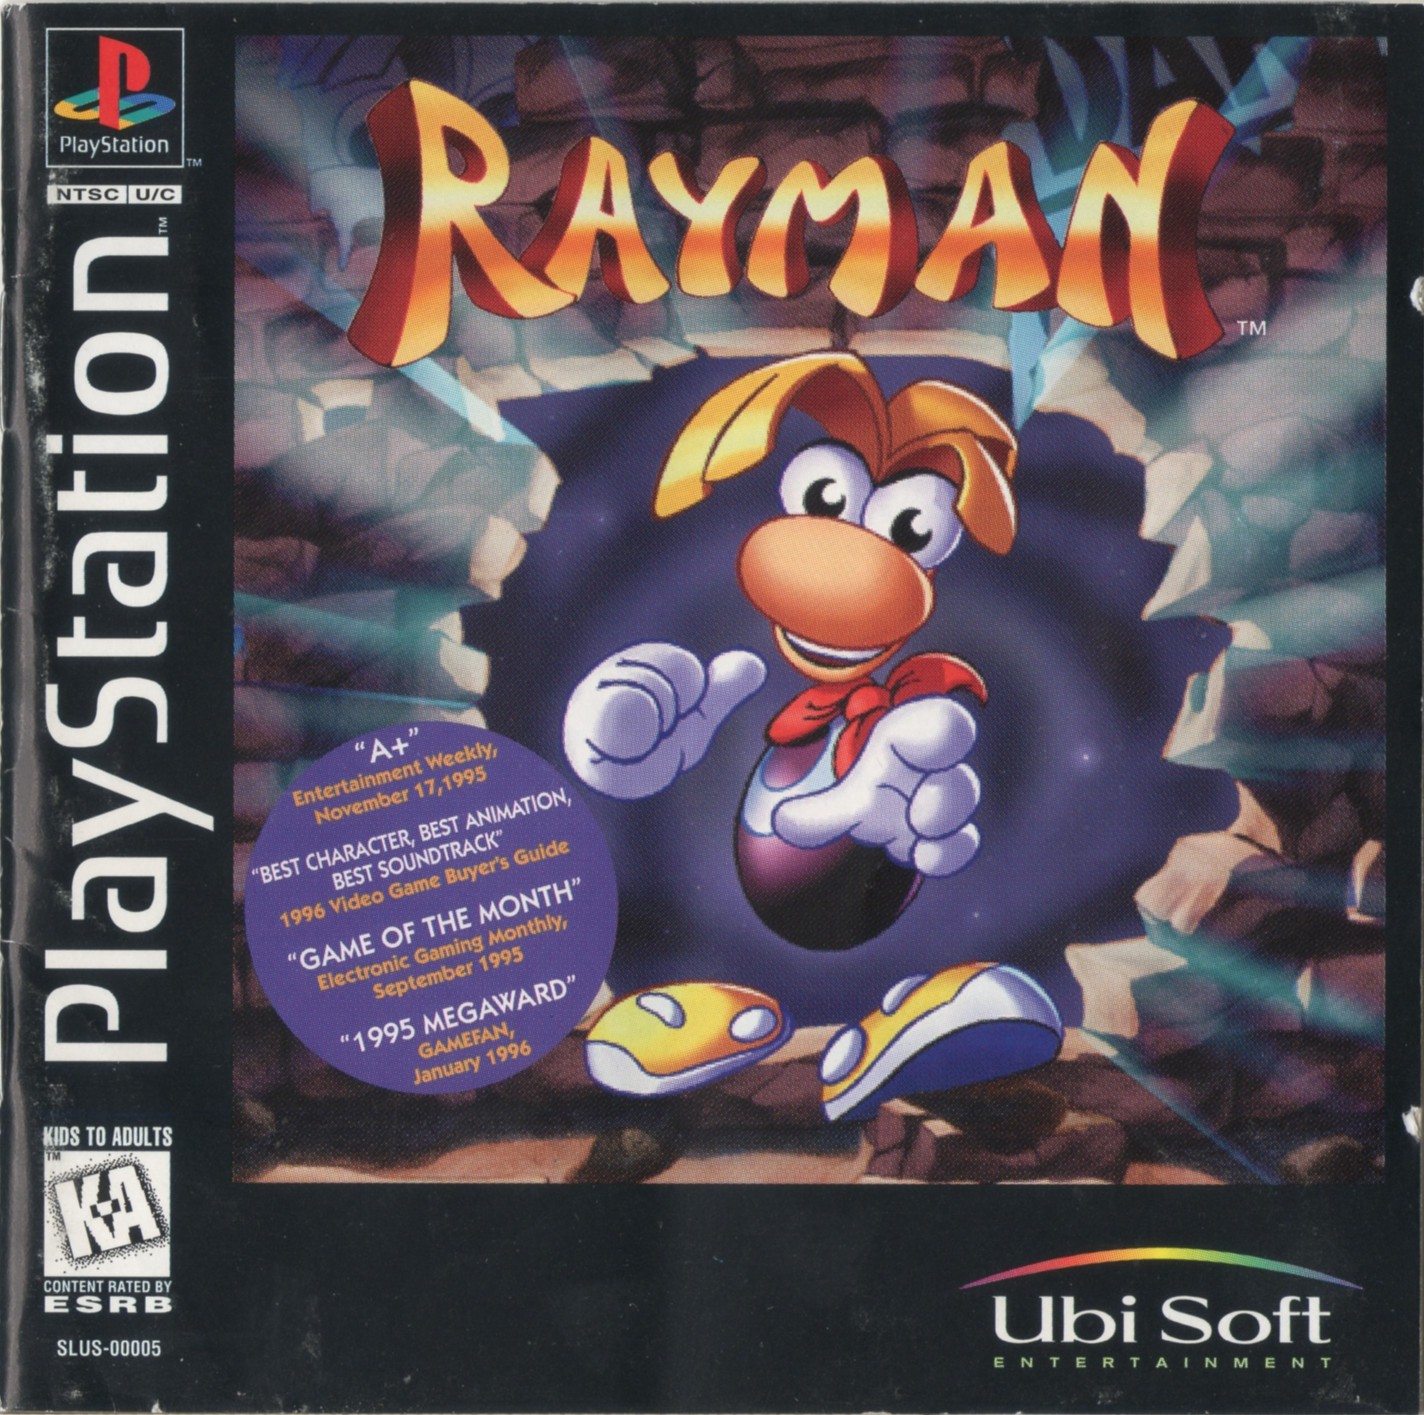 download rayman ps one